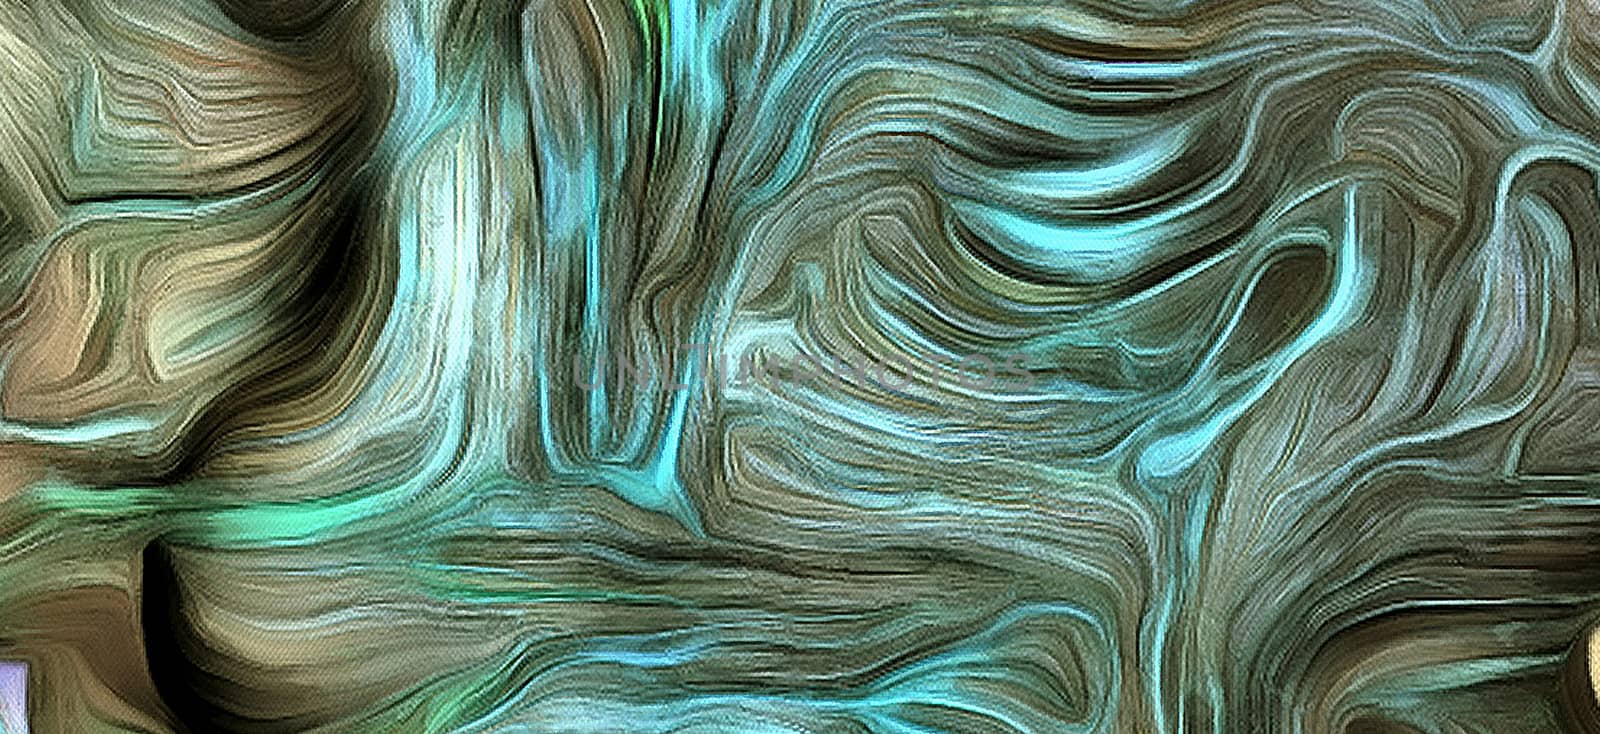 Dimensional Layered Abstract of Swirling Colors. 3D rendering.